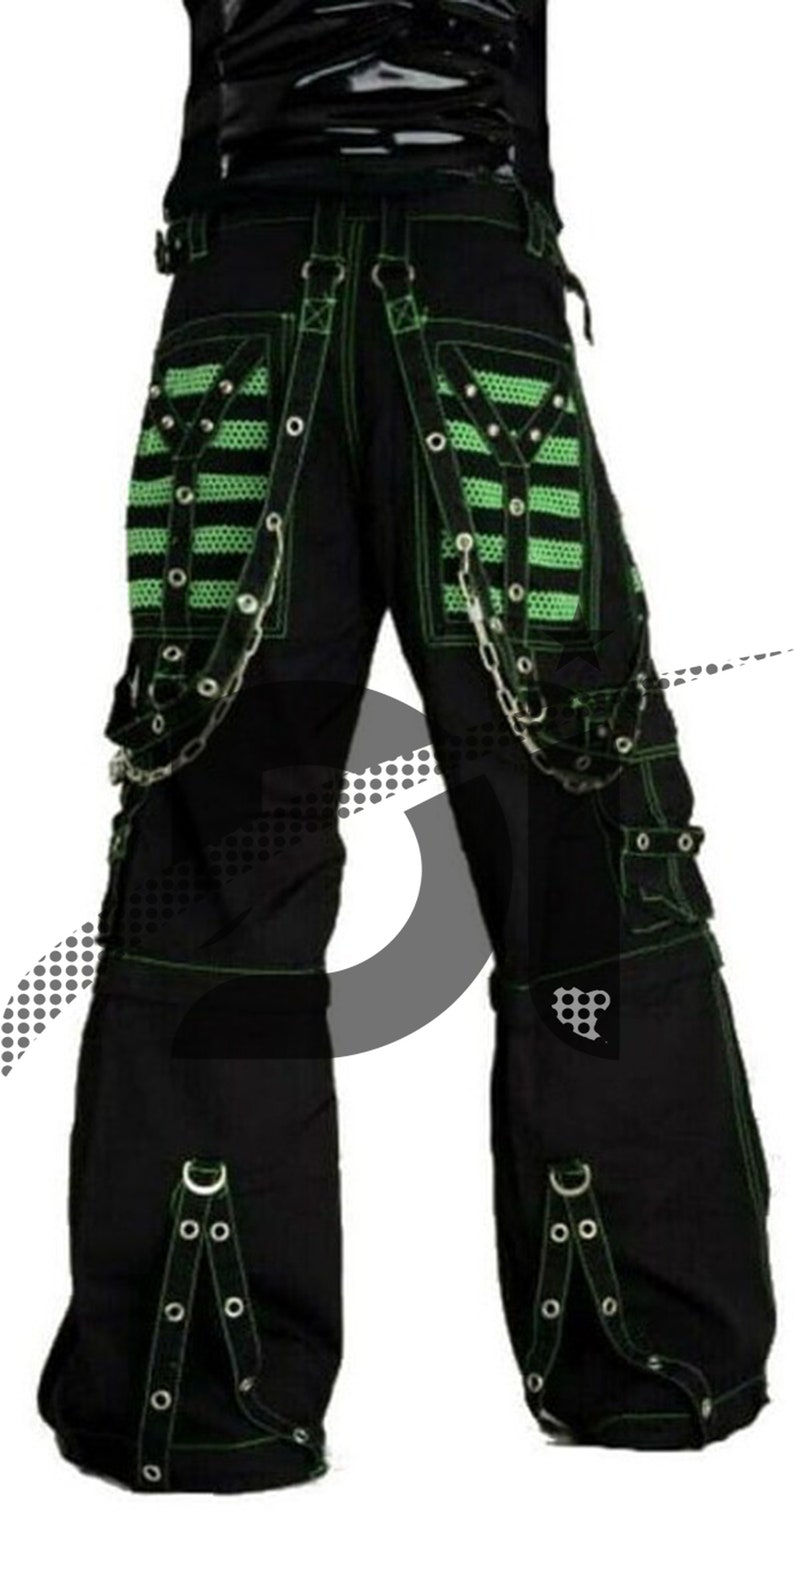 Unisex Gothic Green Threads Pant/Short Black Punk Buckle Zips Chain Strap Punk Trousers with understated Gothic Electro Pants image 4